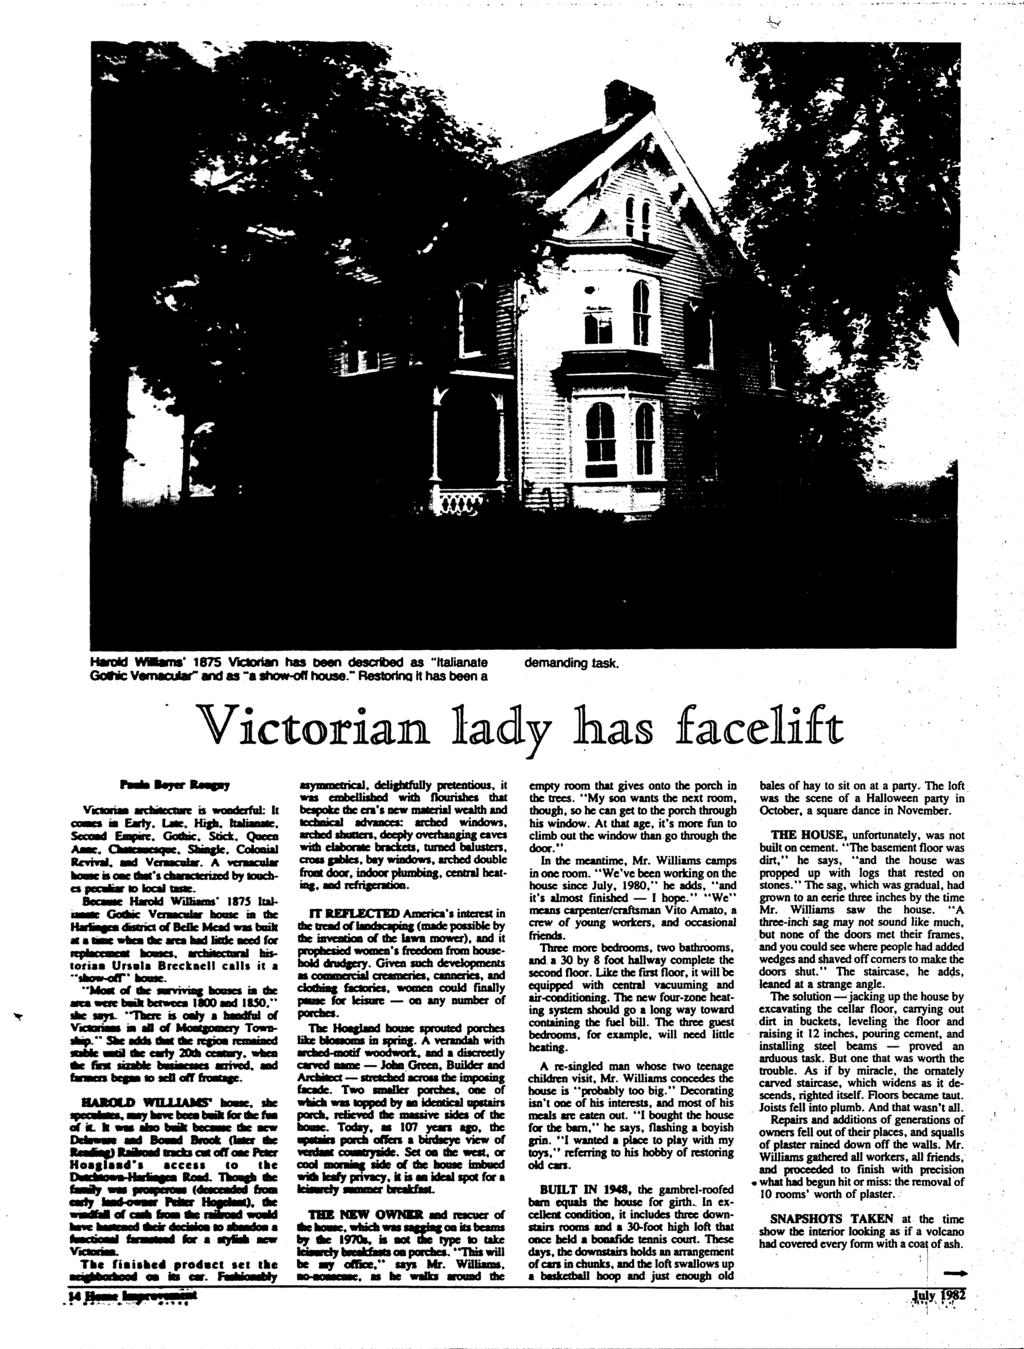 1875 Victorian has been described as "ItaJianate Gottic Vernacular and as "a show-off house." Restoring it has been a demanding task. Victorian lady has Enpac. Gothic. Slick.